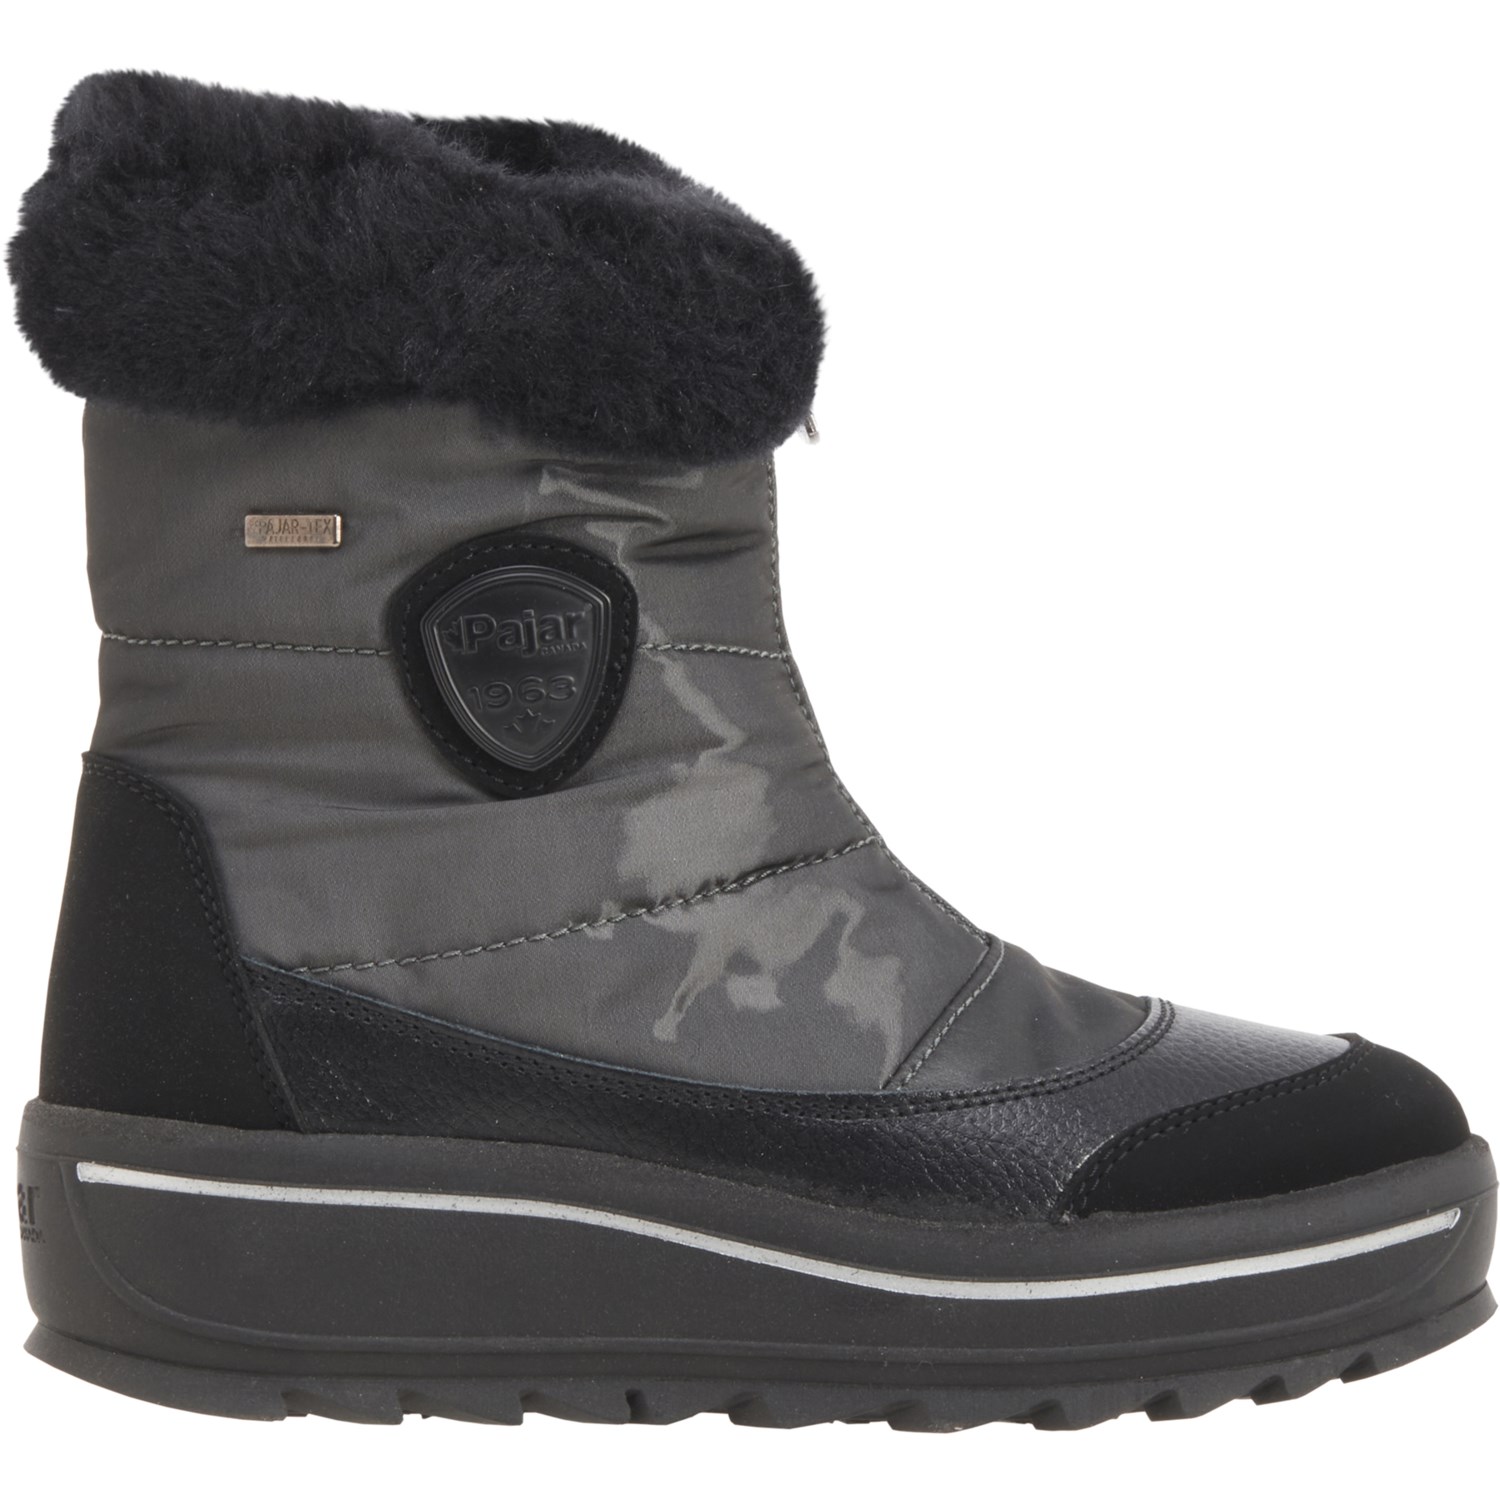 Pajar Made in Europe Temoen Winter Boots (For Women) - Save 60%